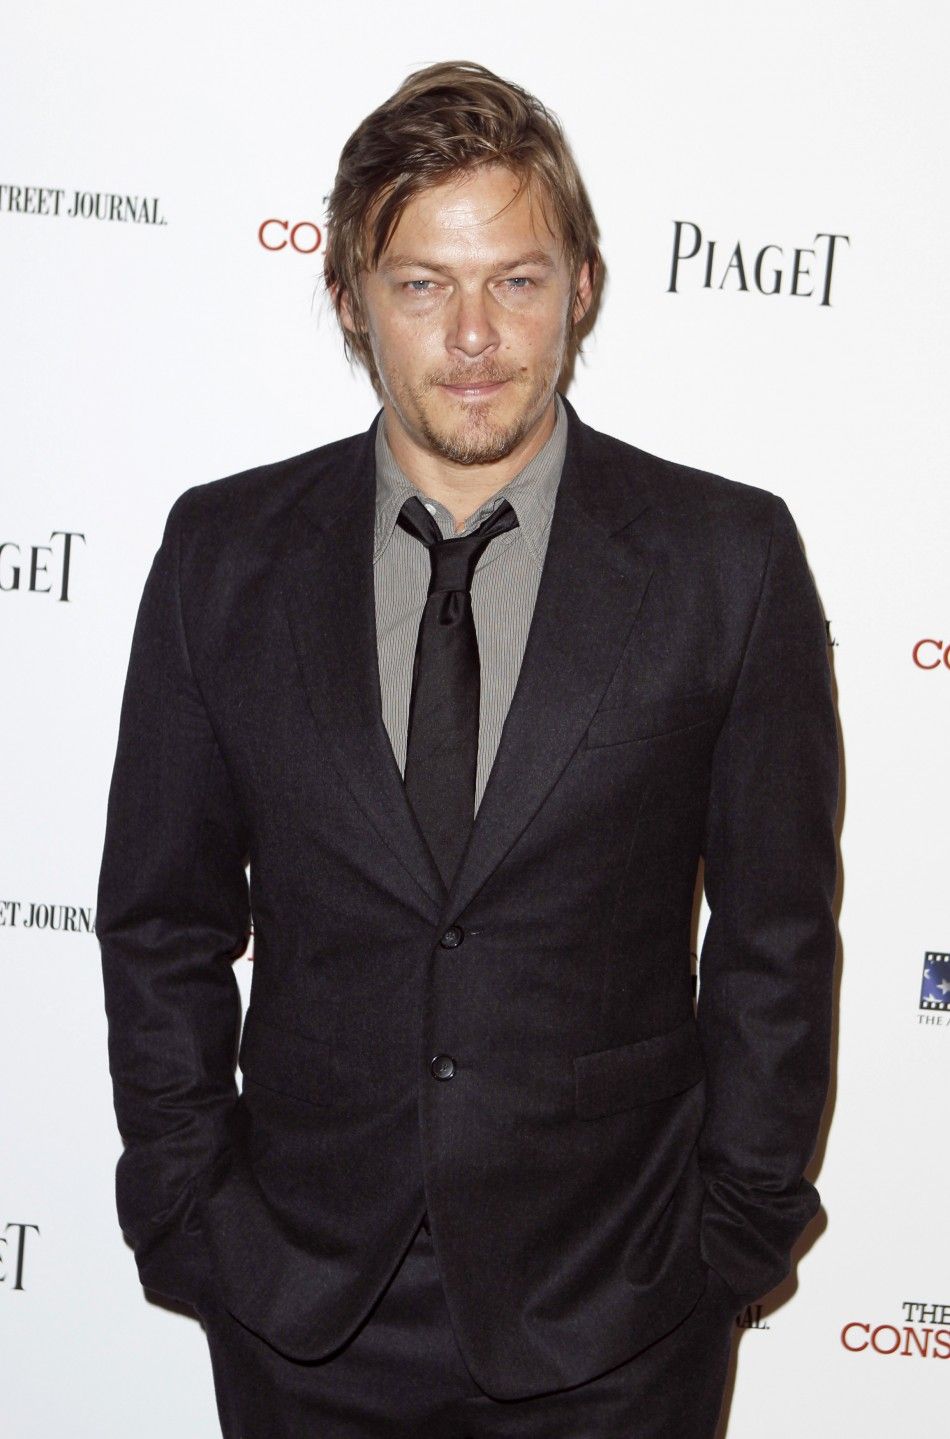 Cast member Norman Reedus arrives at the premiere of quotThe Conspiratorquot in New York April 11, 2011.